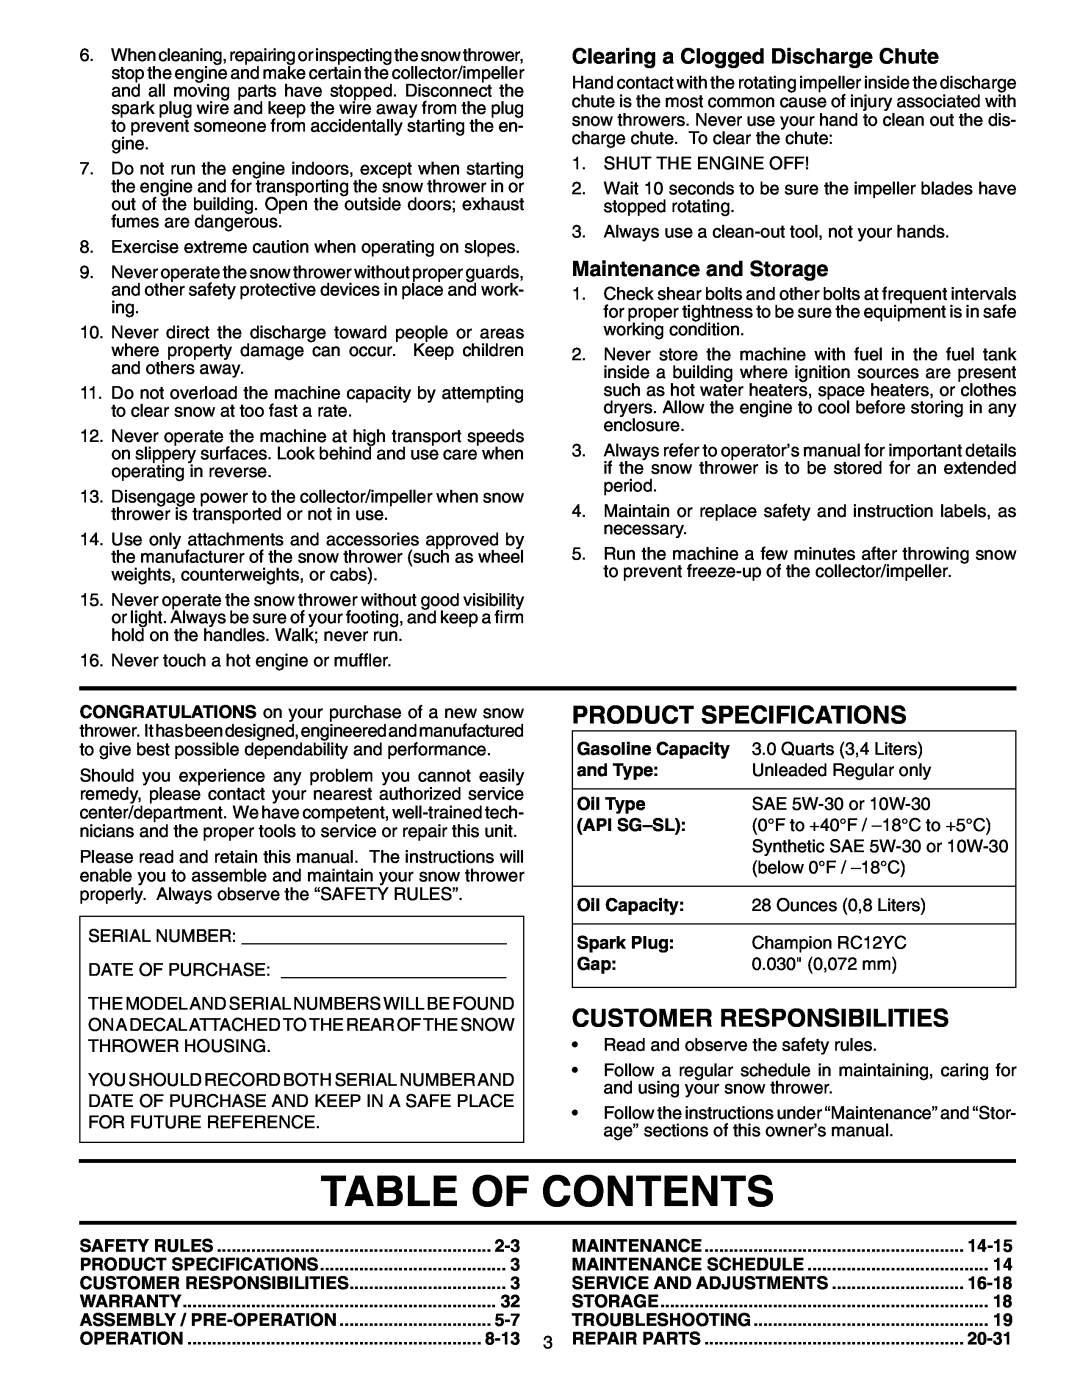 Husqvarna 9527SBEB Table Of Contents, Product Specifications, Customer Responsibilities, Maintenance and Storage, and Type 